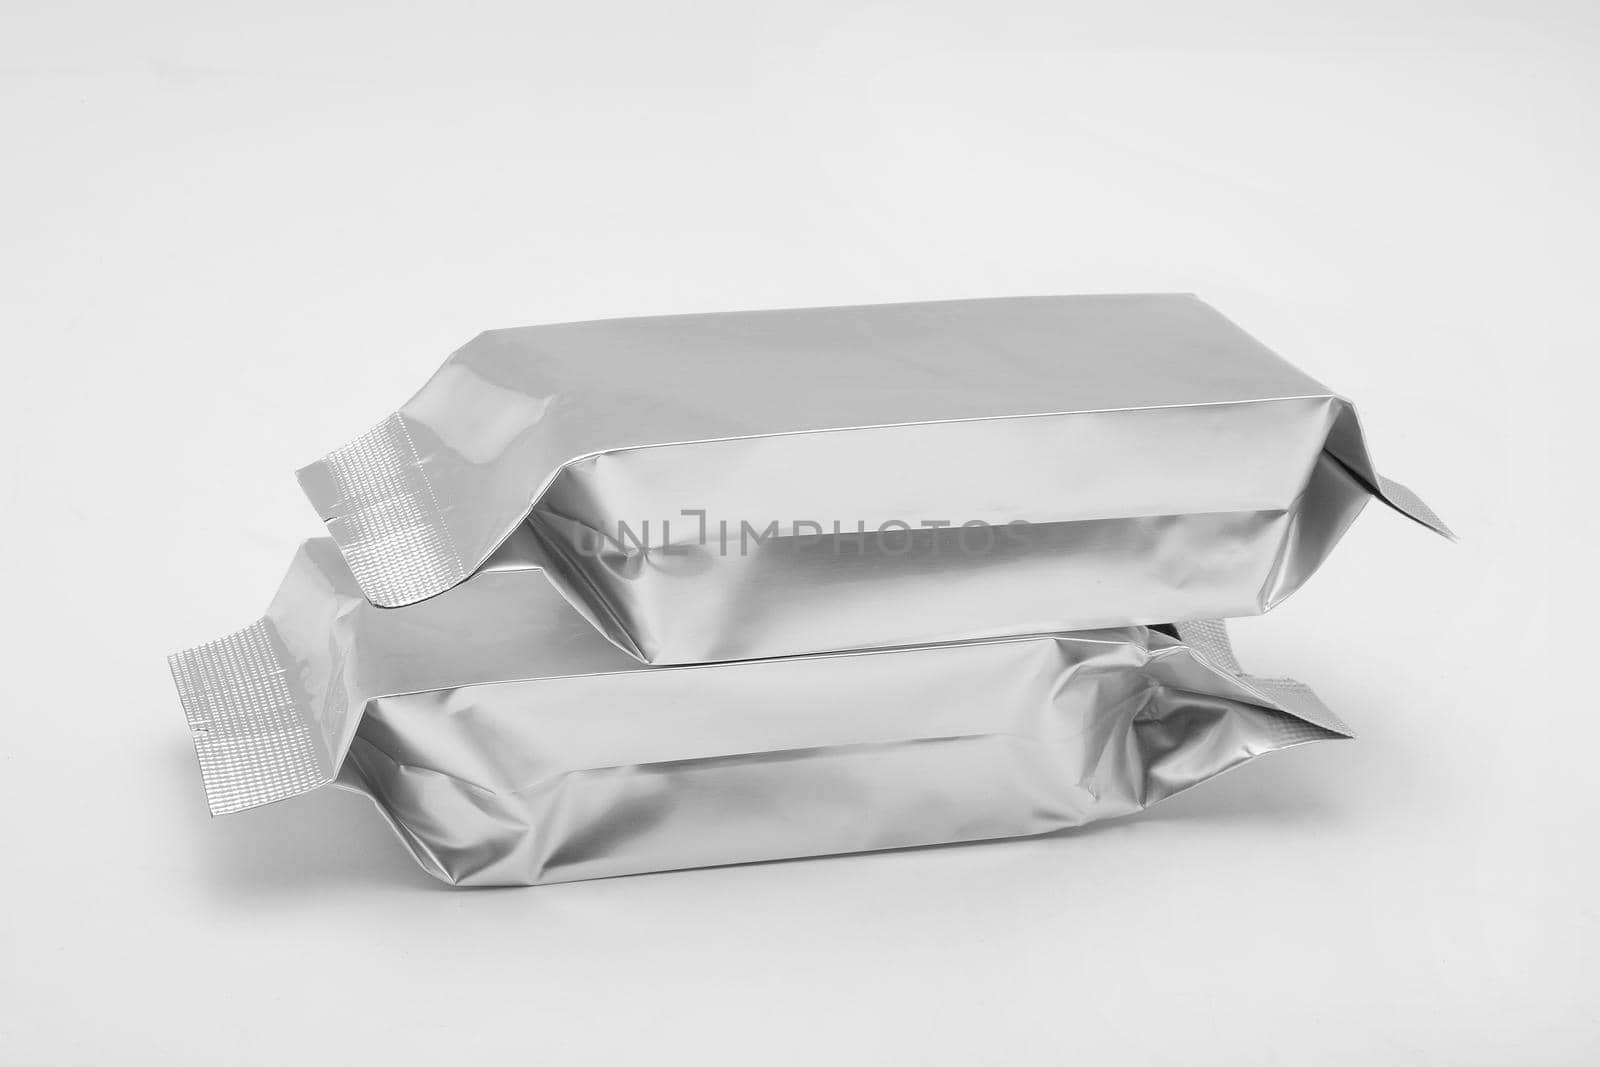 Foil bag package isolated on white background